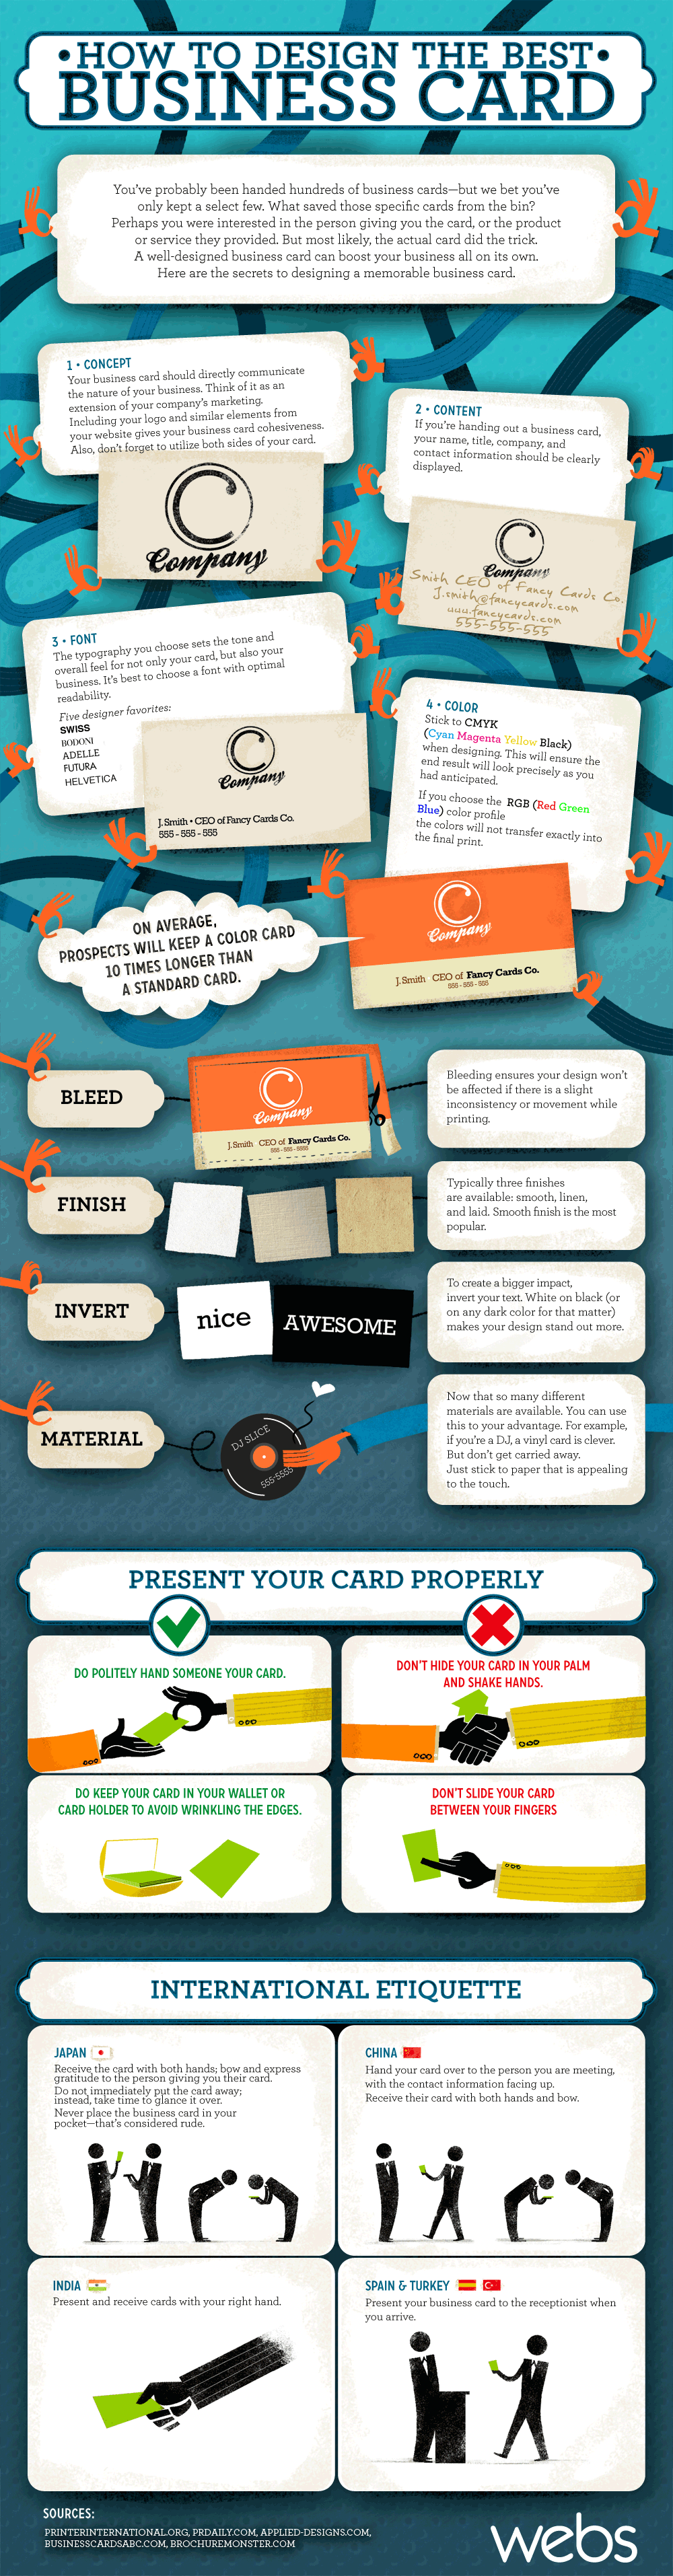 how to design the best business card